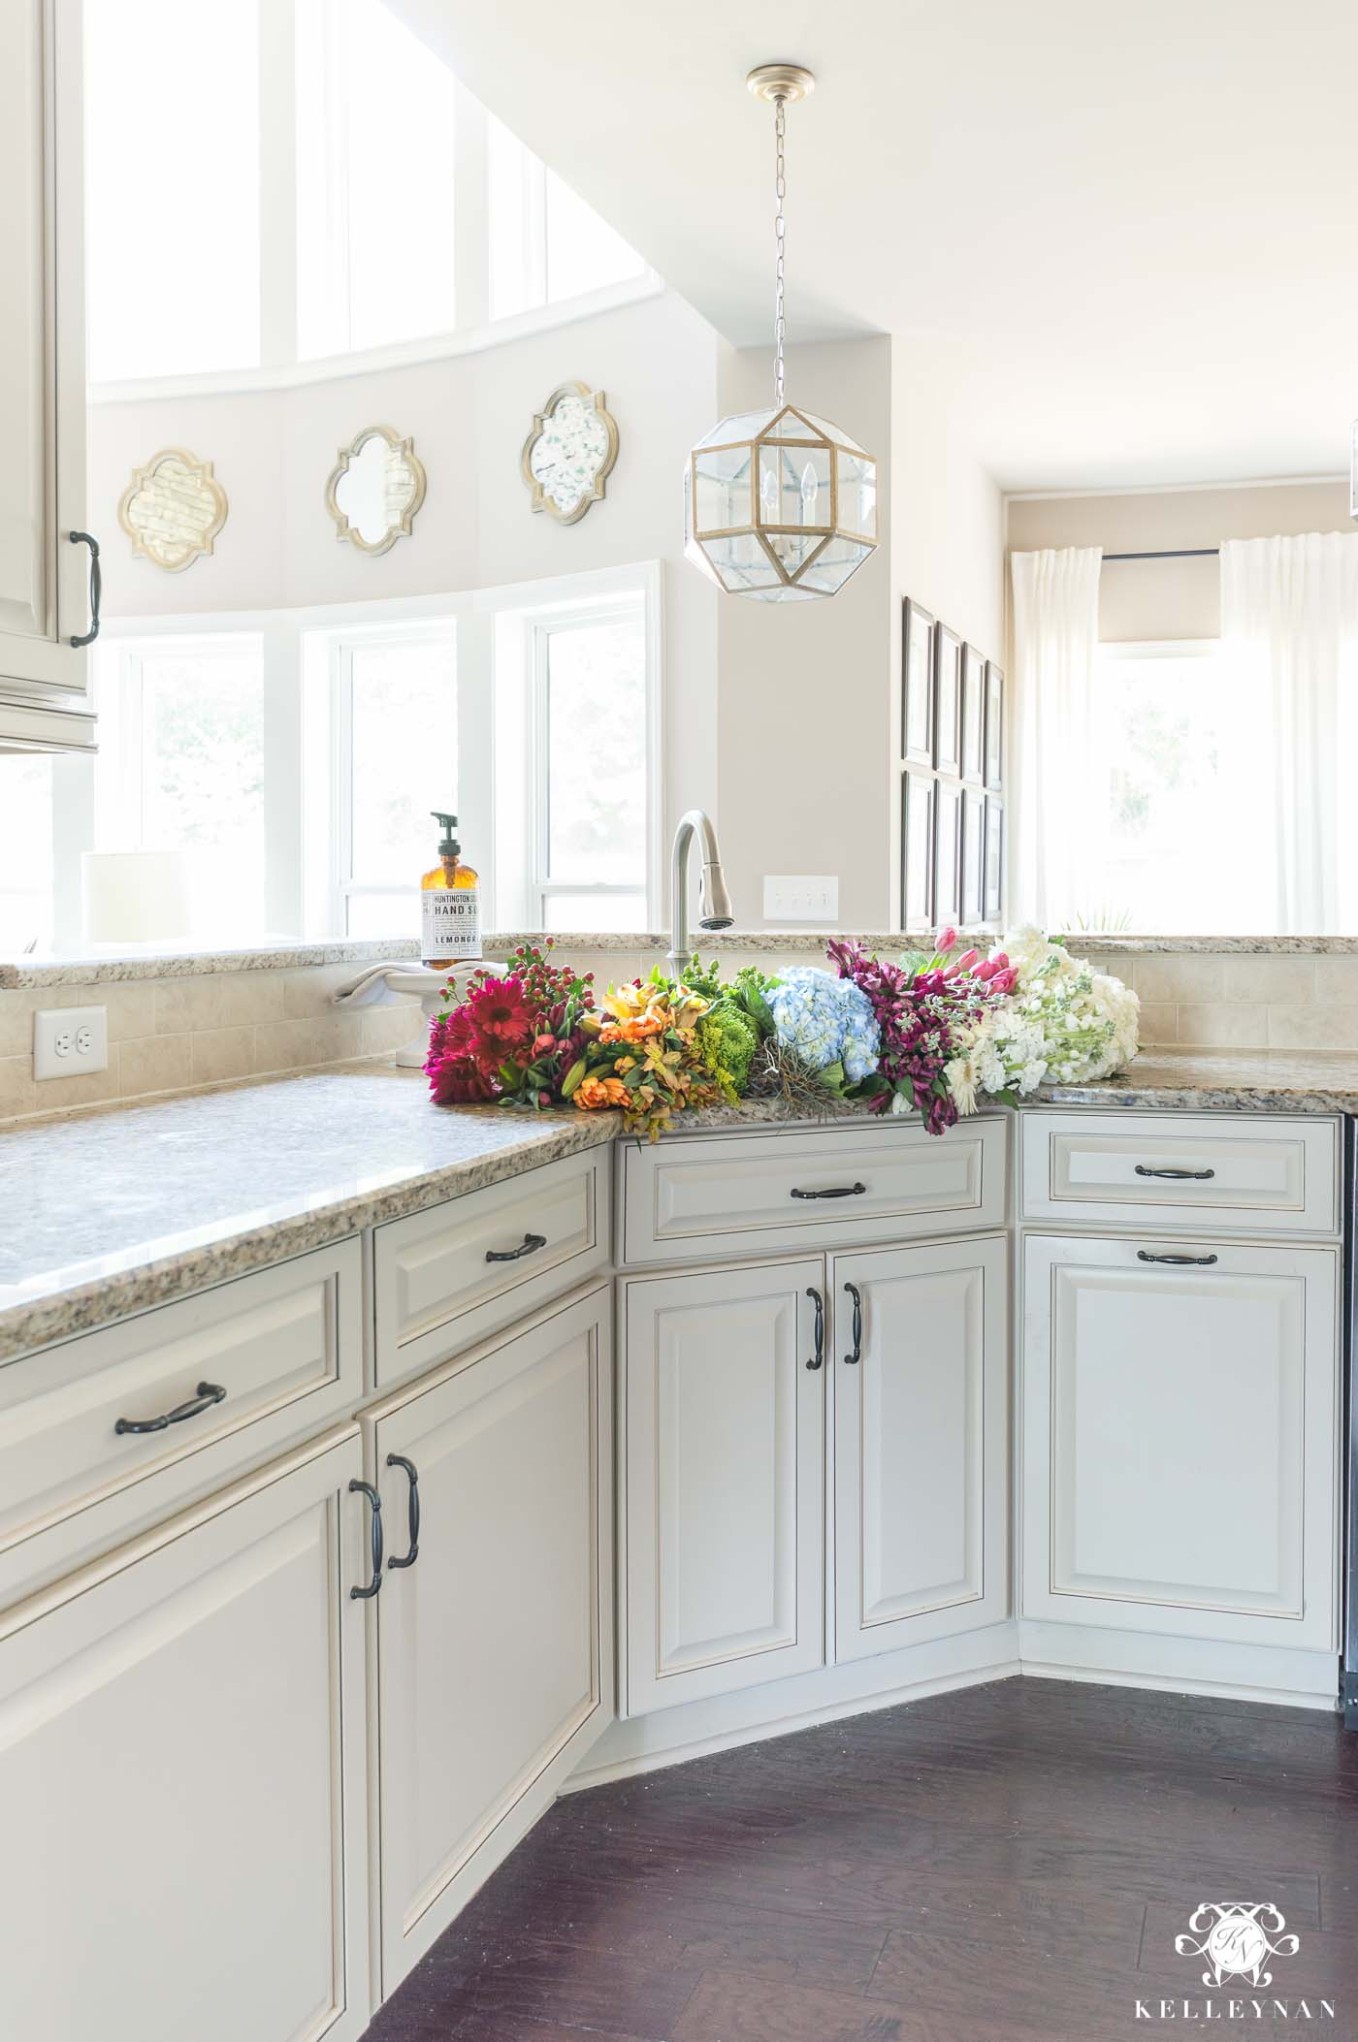 The Plan to Bring Modern Touches into a Traditional Cream Kitchen